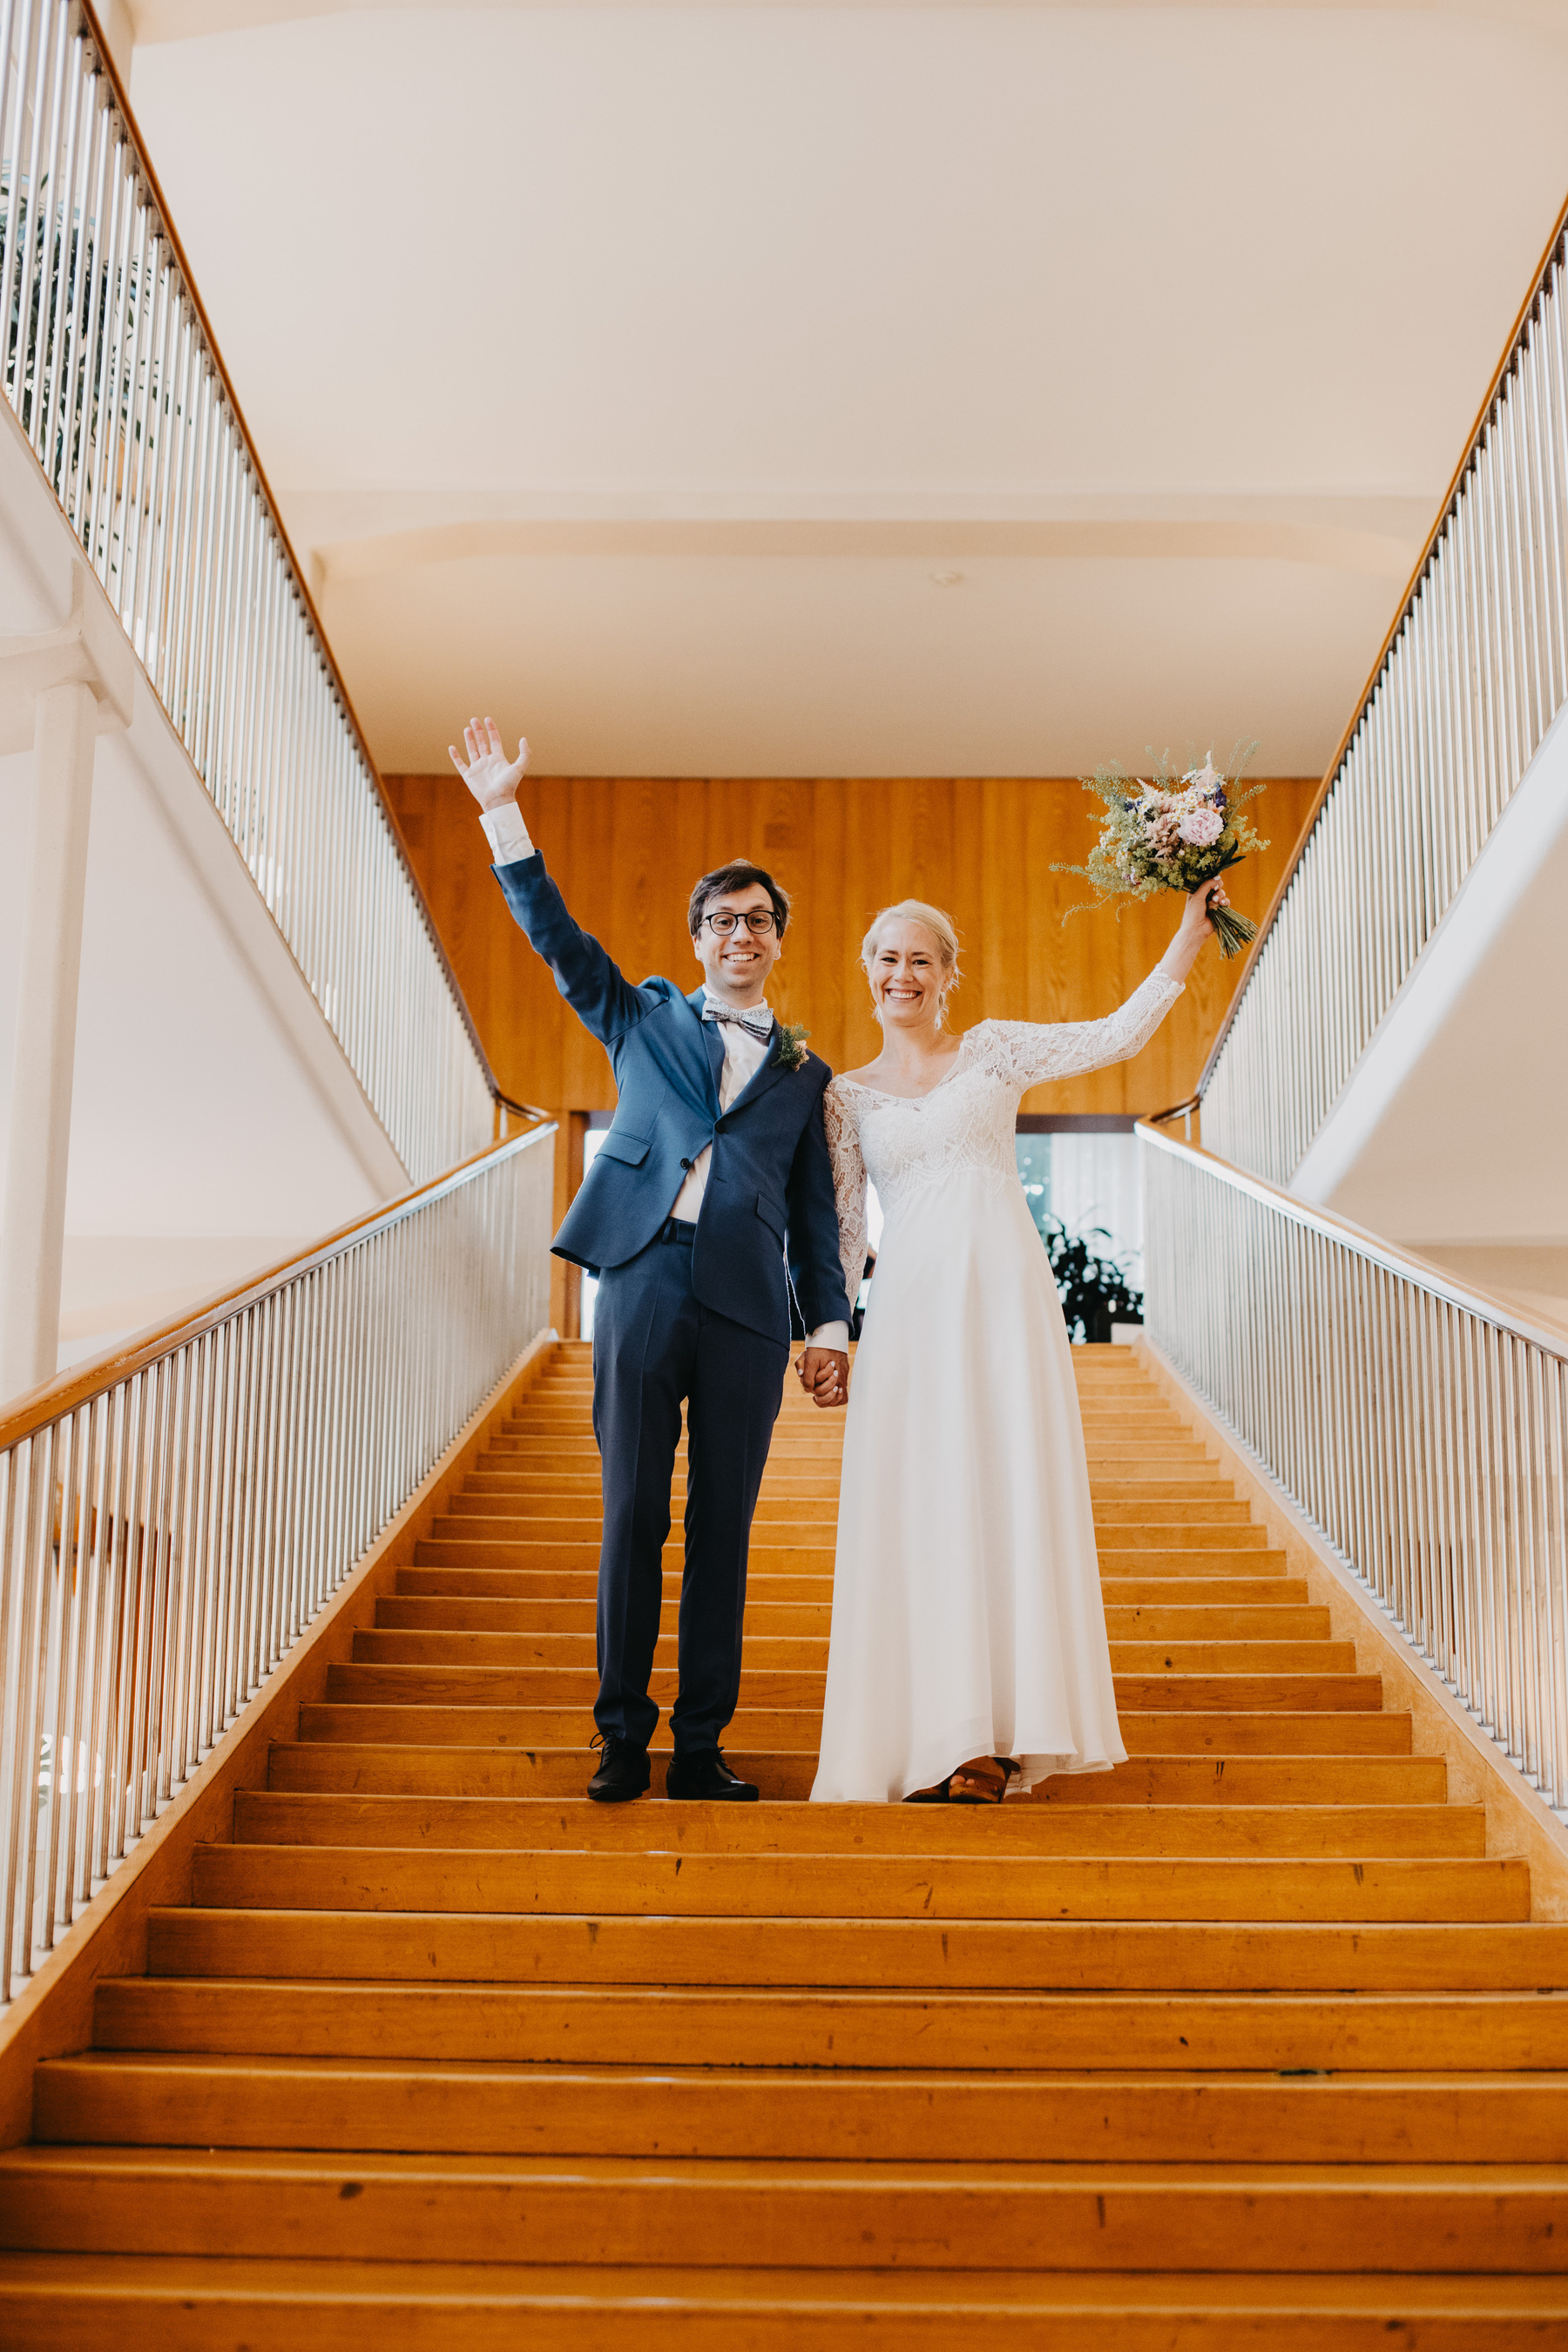 Auto-generated description: A newlywed couple is standing at the top of a staircase, smiling and waving, with the bride holding a bouquet.